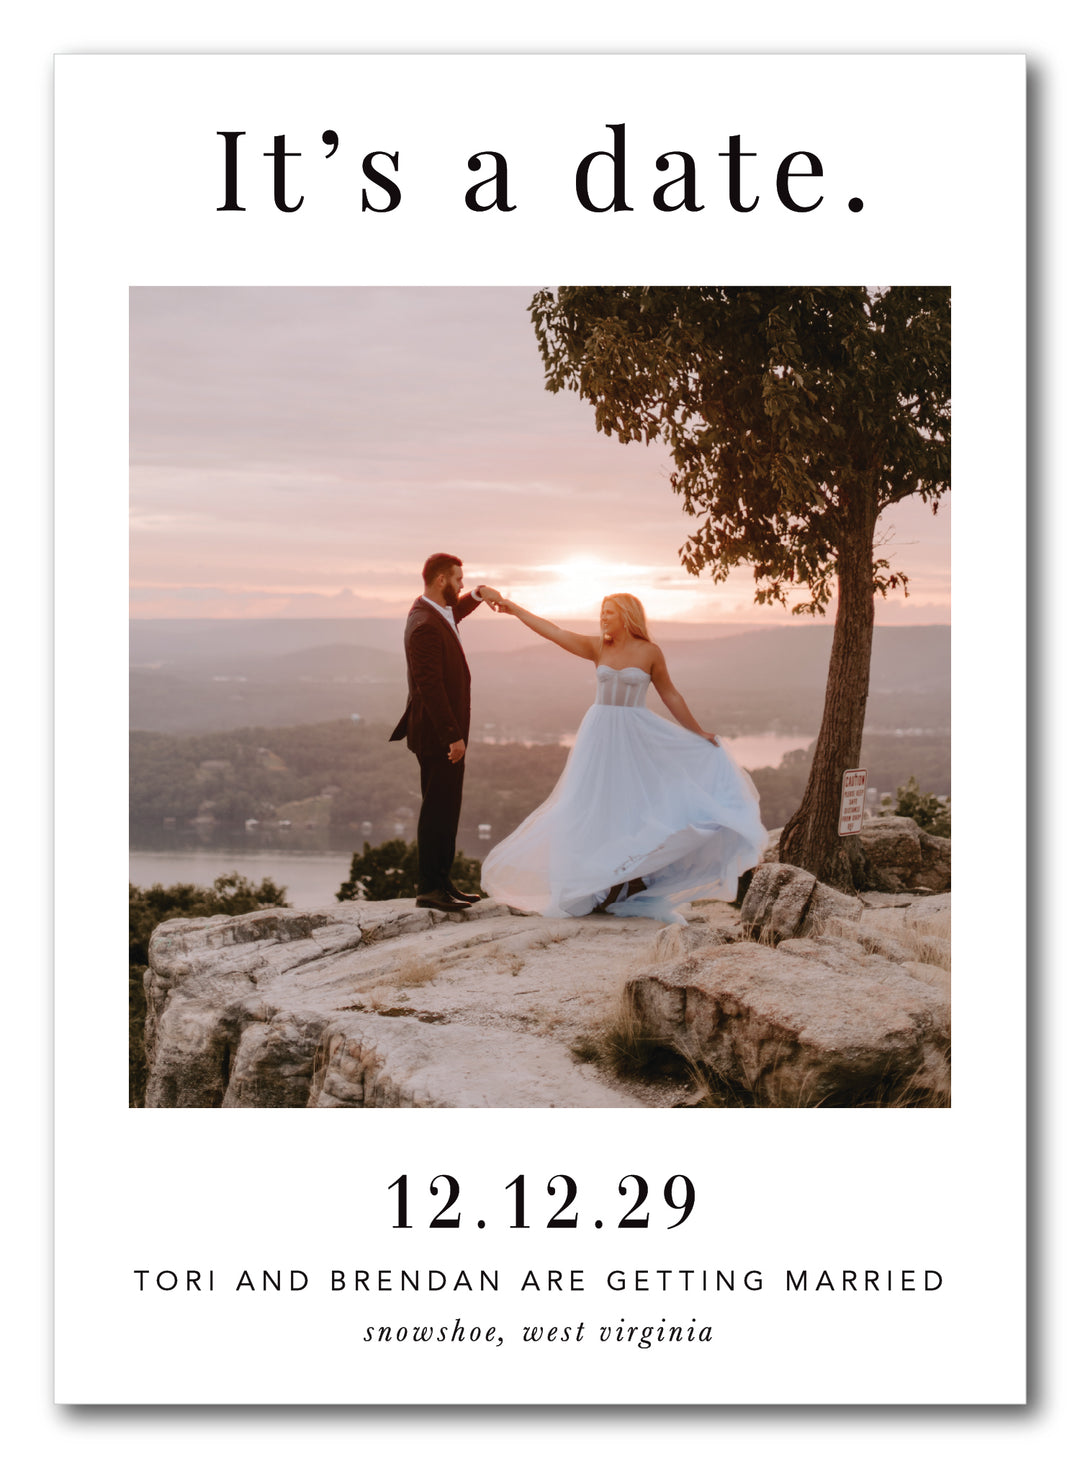 The Tori Save The Date